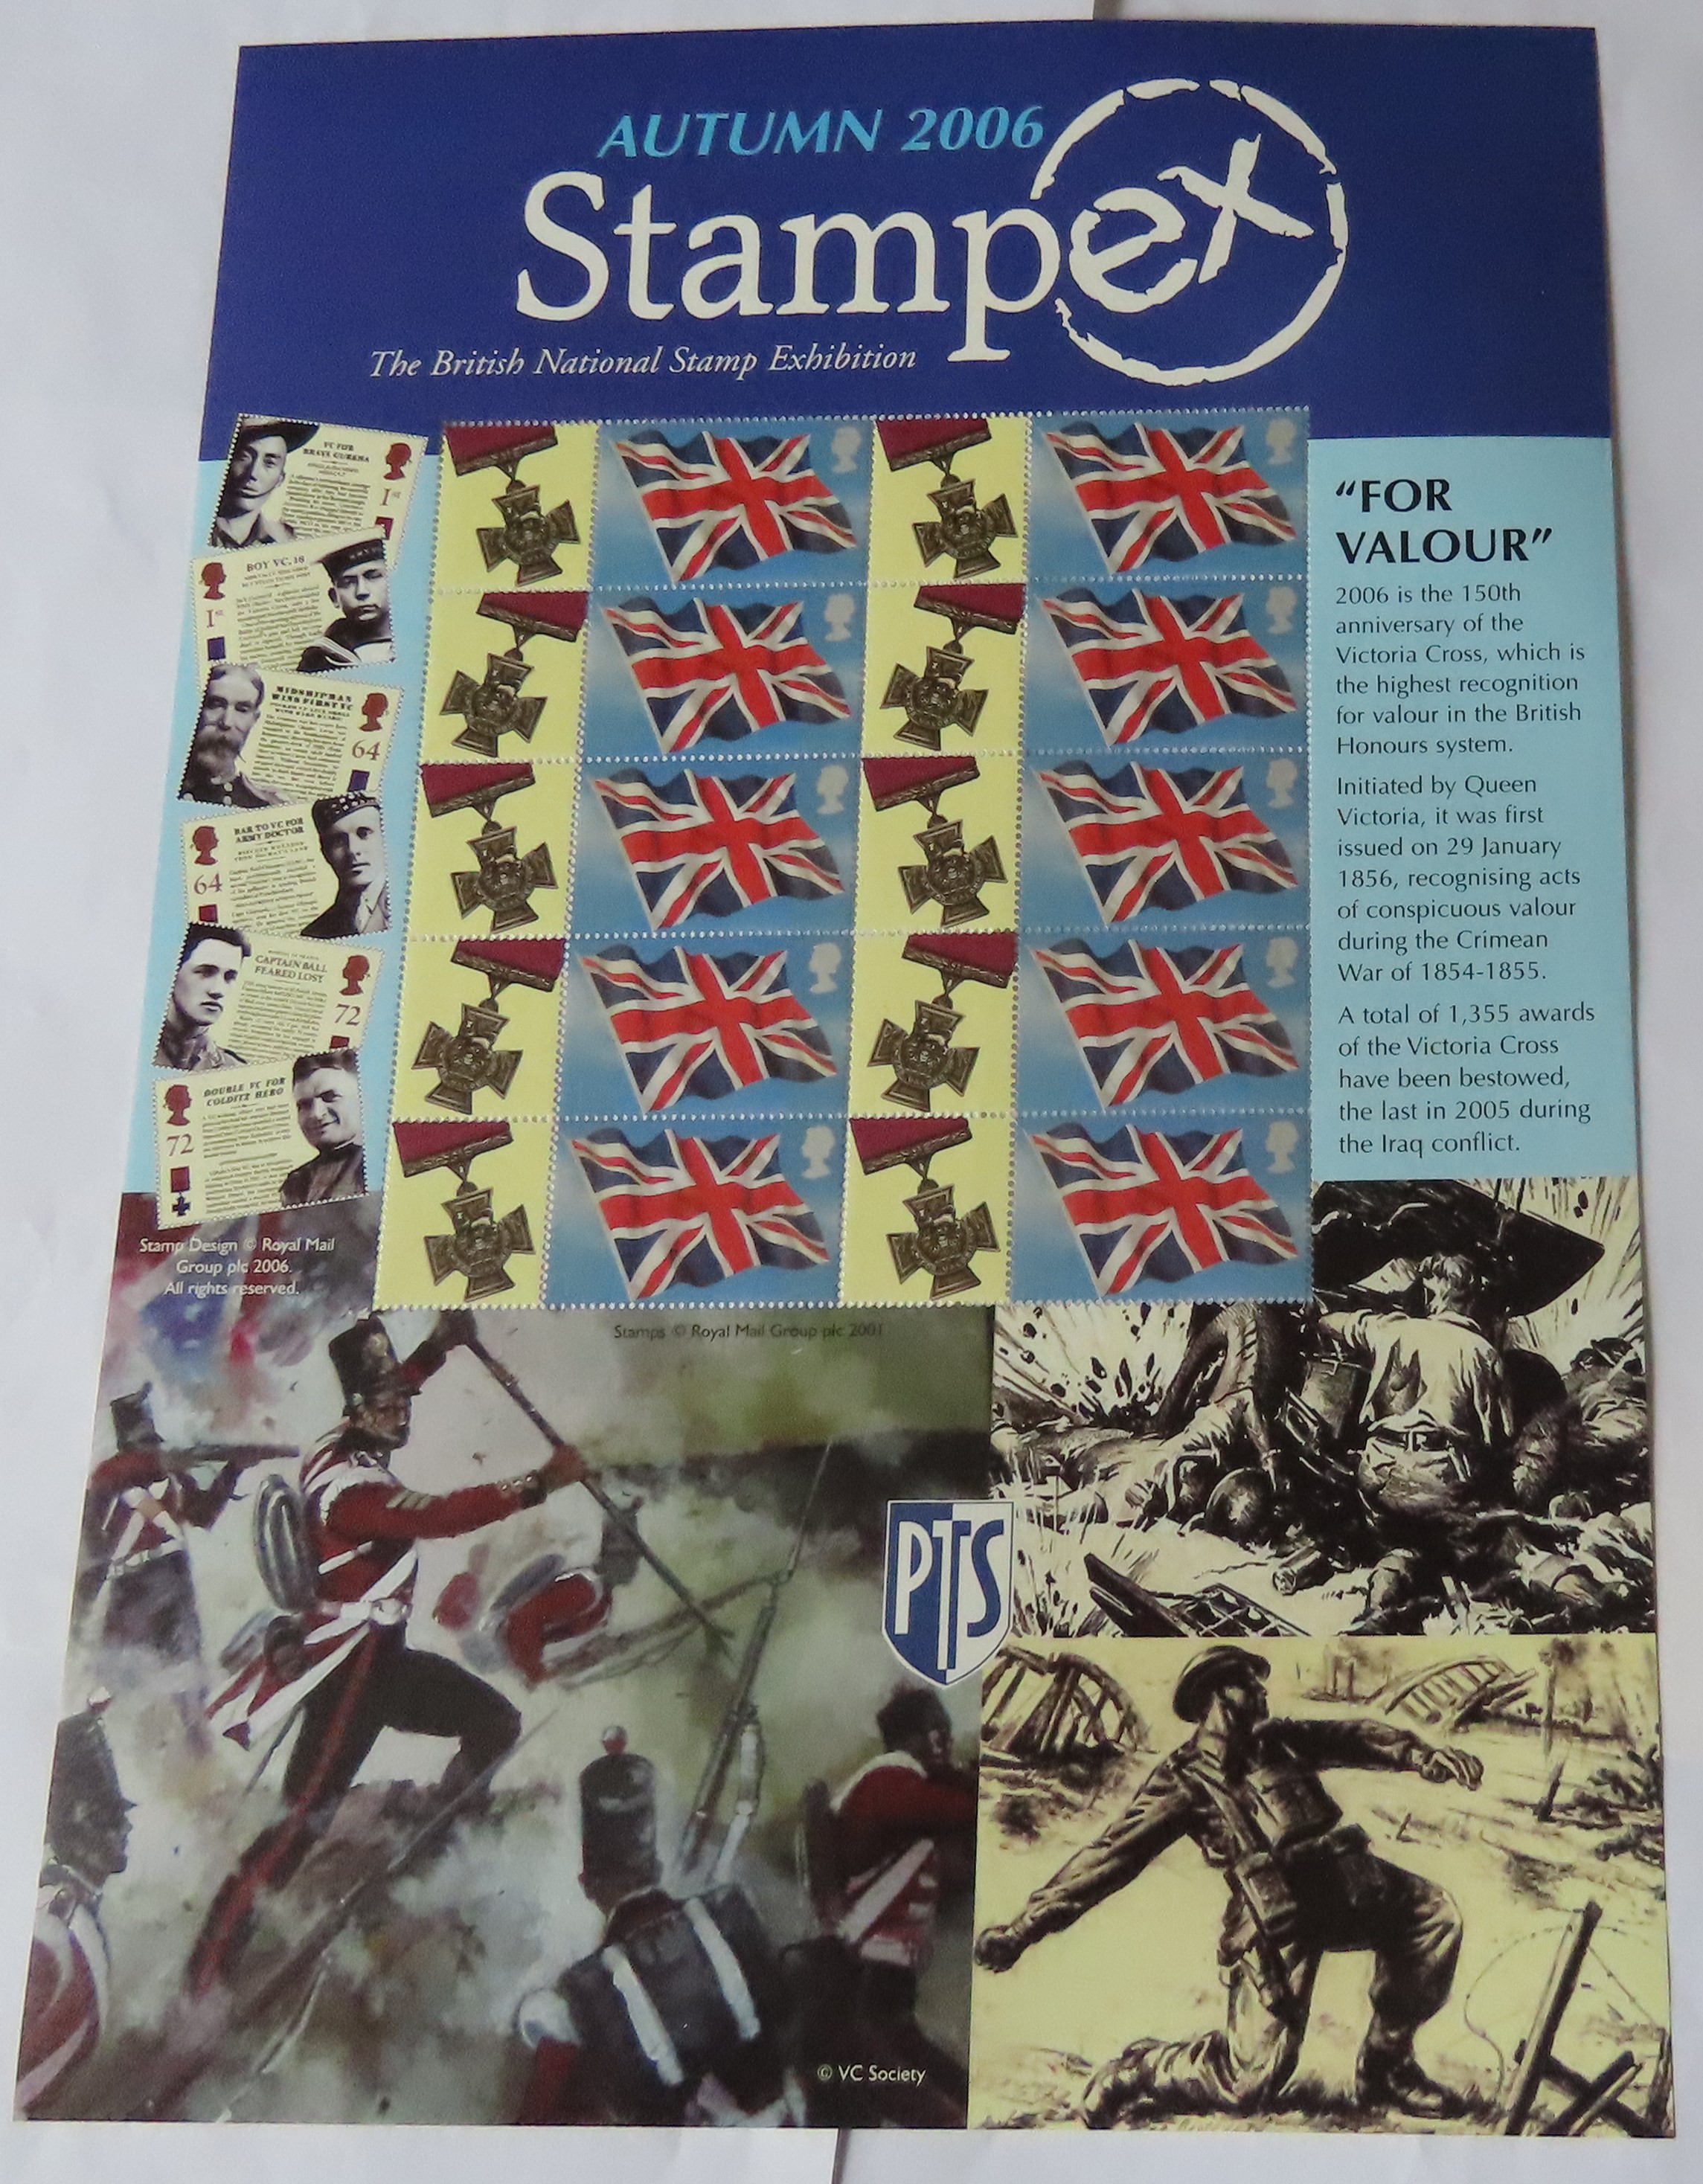 Great Britain 2006 Autumn Stampex / Victoria Cross, Royal Mail Smilers Sheet, Ten x First Class